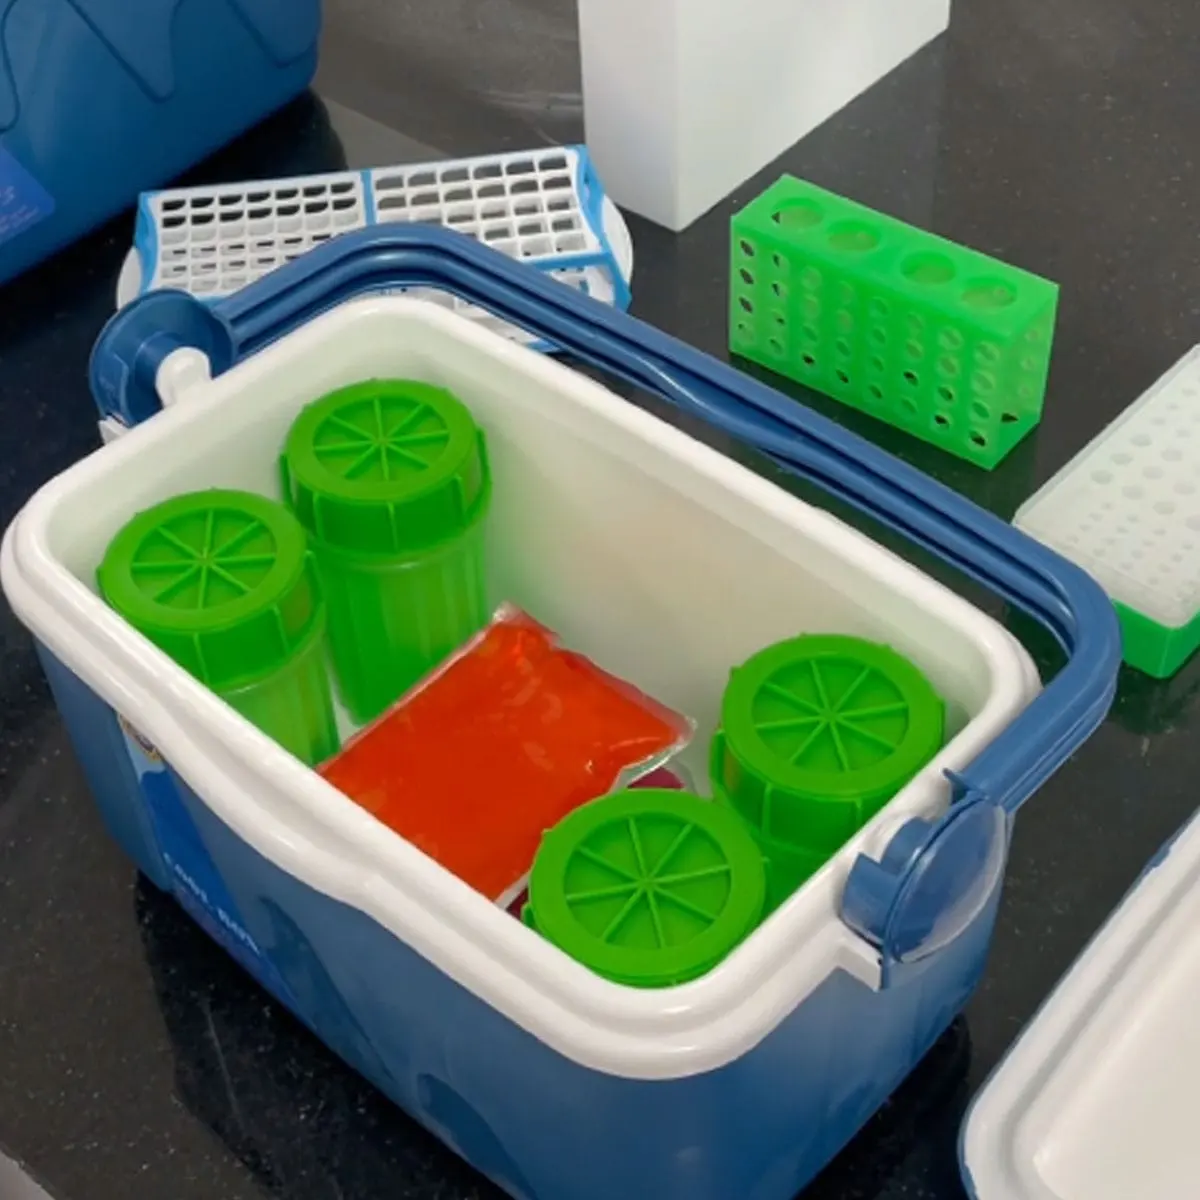 pip-pathology-sample-transport-container3